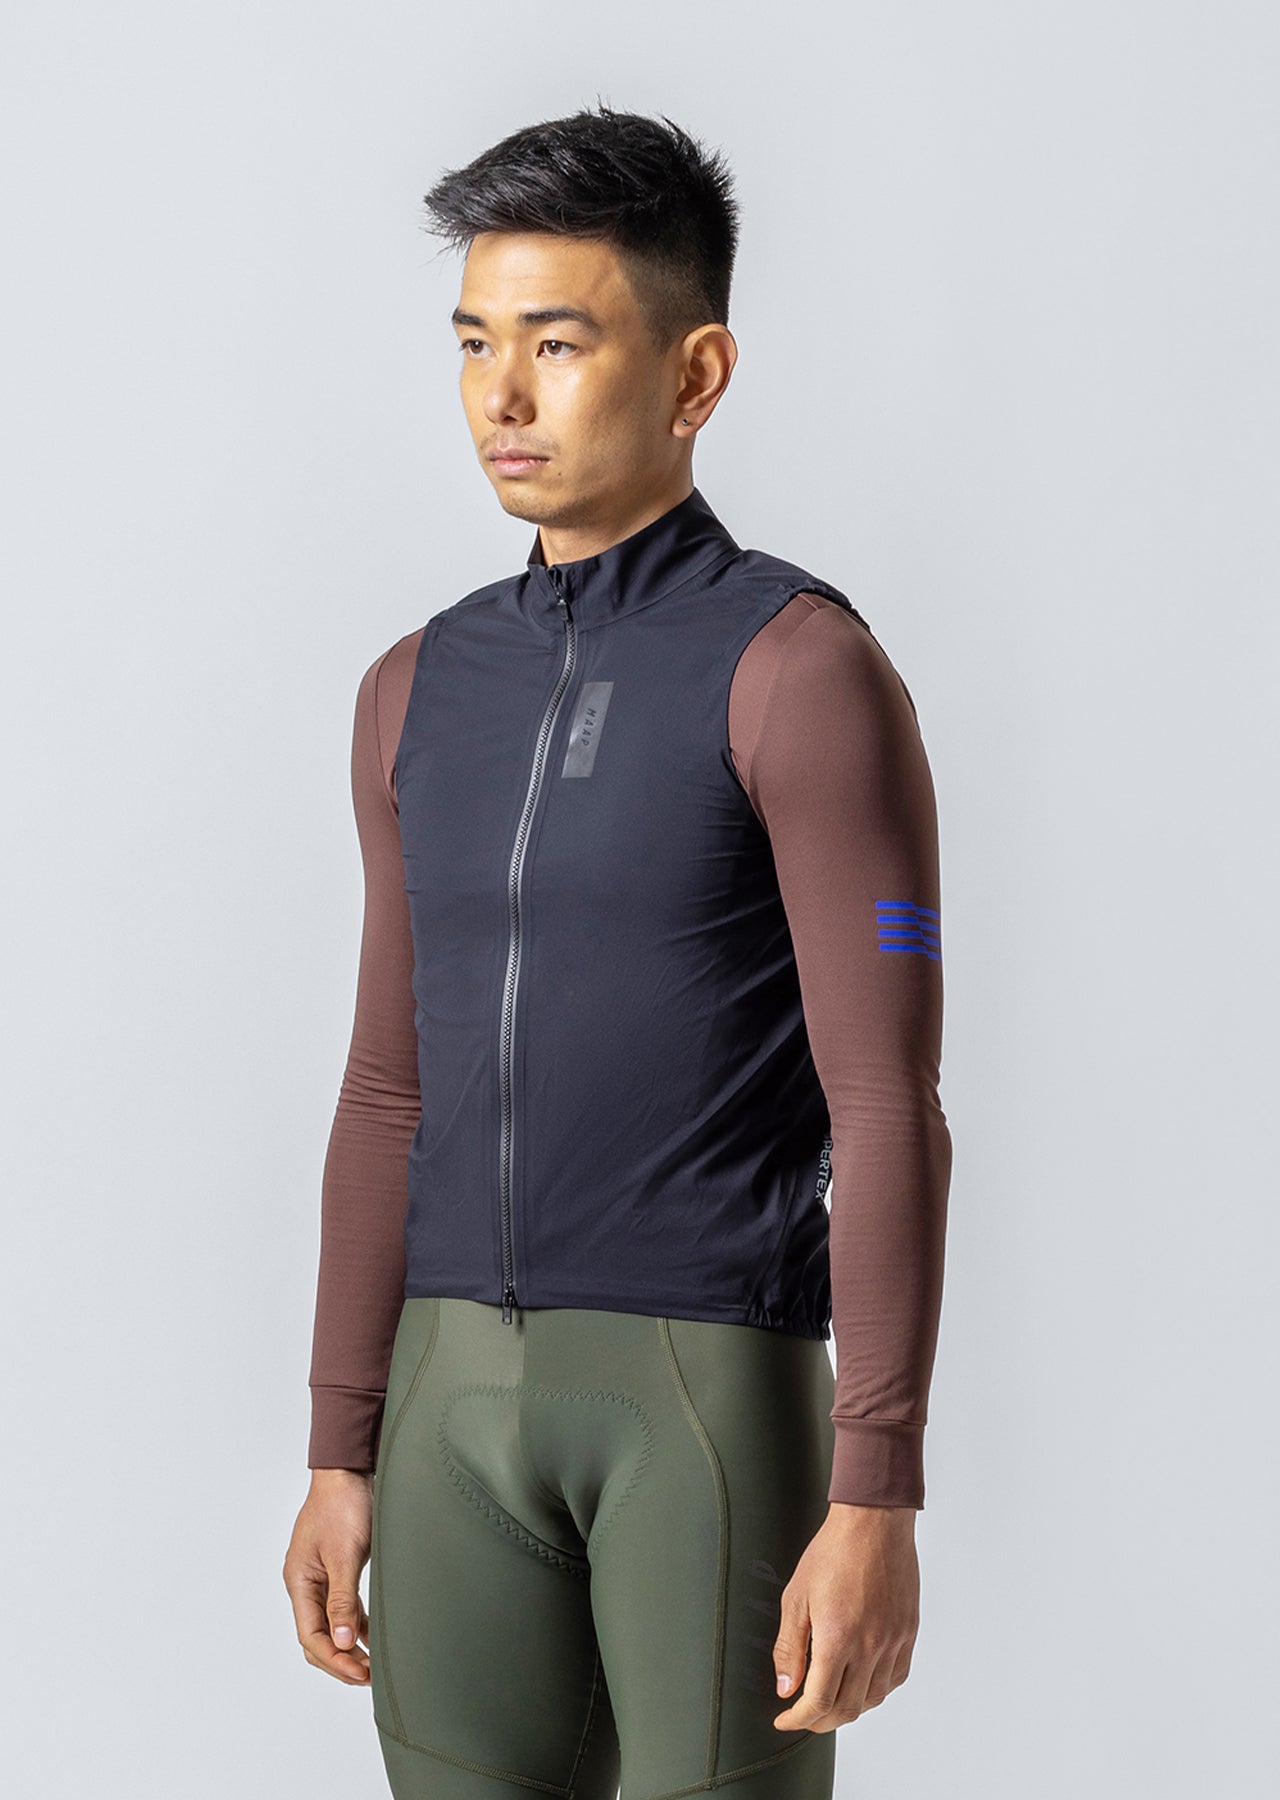 MAAP Atmos Vest - Black – Cycle Project Store